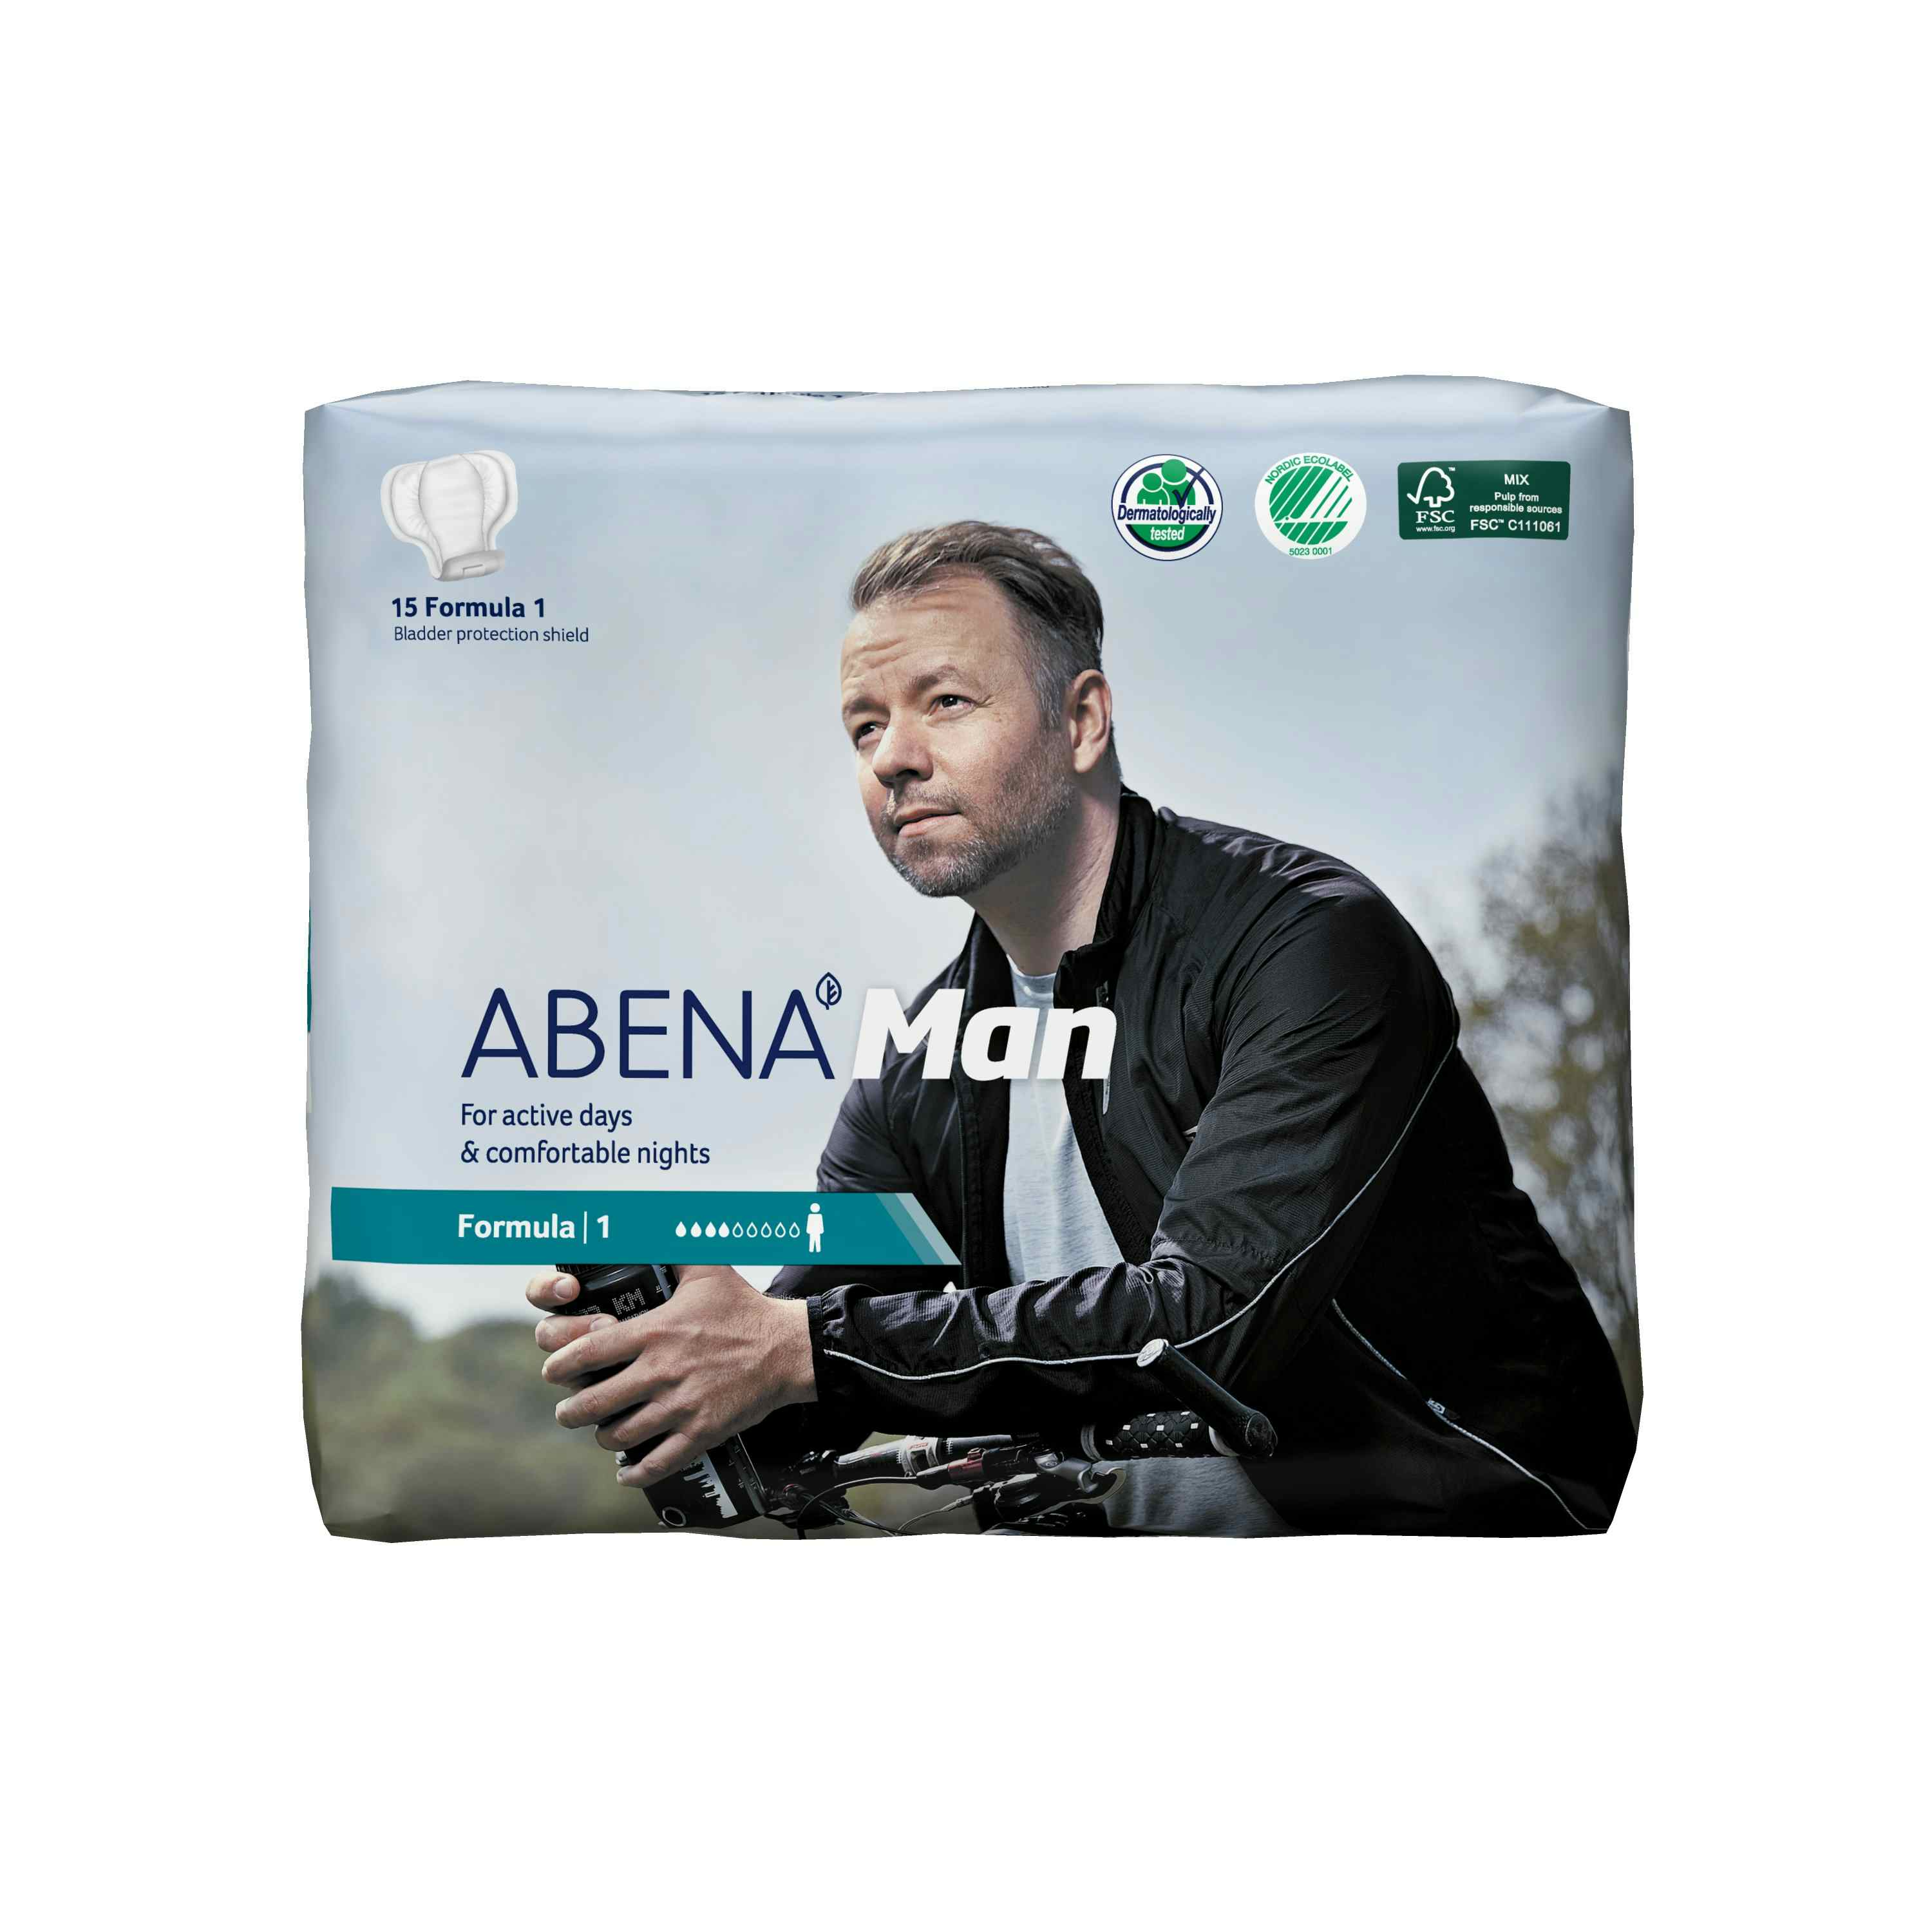  Abena-Man Adult Male Disposable Bladder Control Pad, Light Absorbency, 1000017162, Formula 1 (11") - Case of 180 Pads (12 Bags)